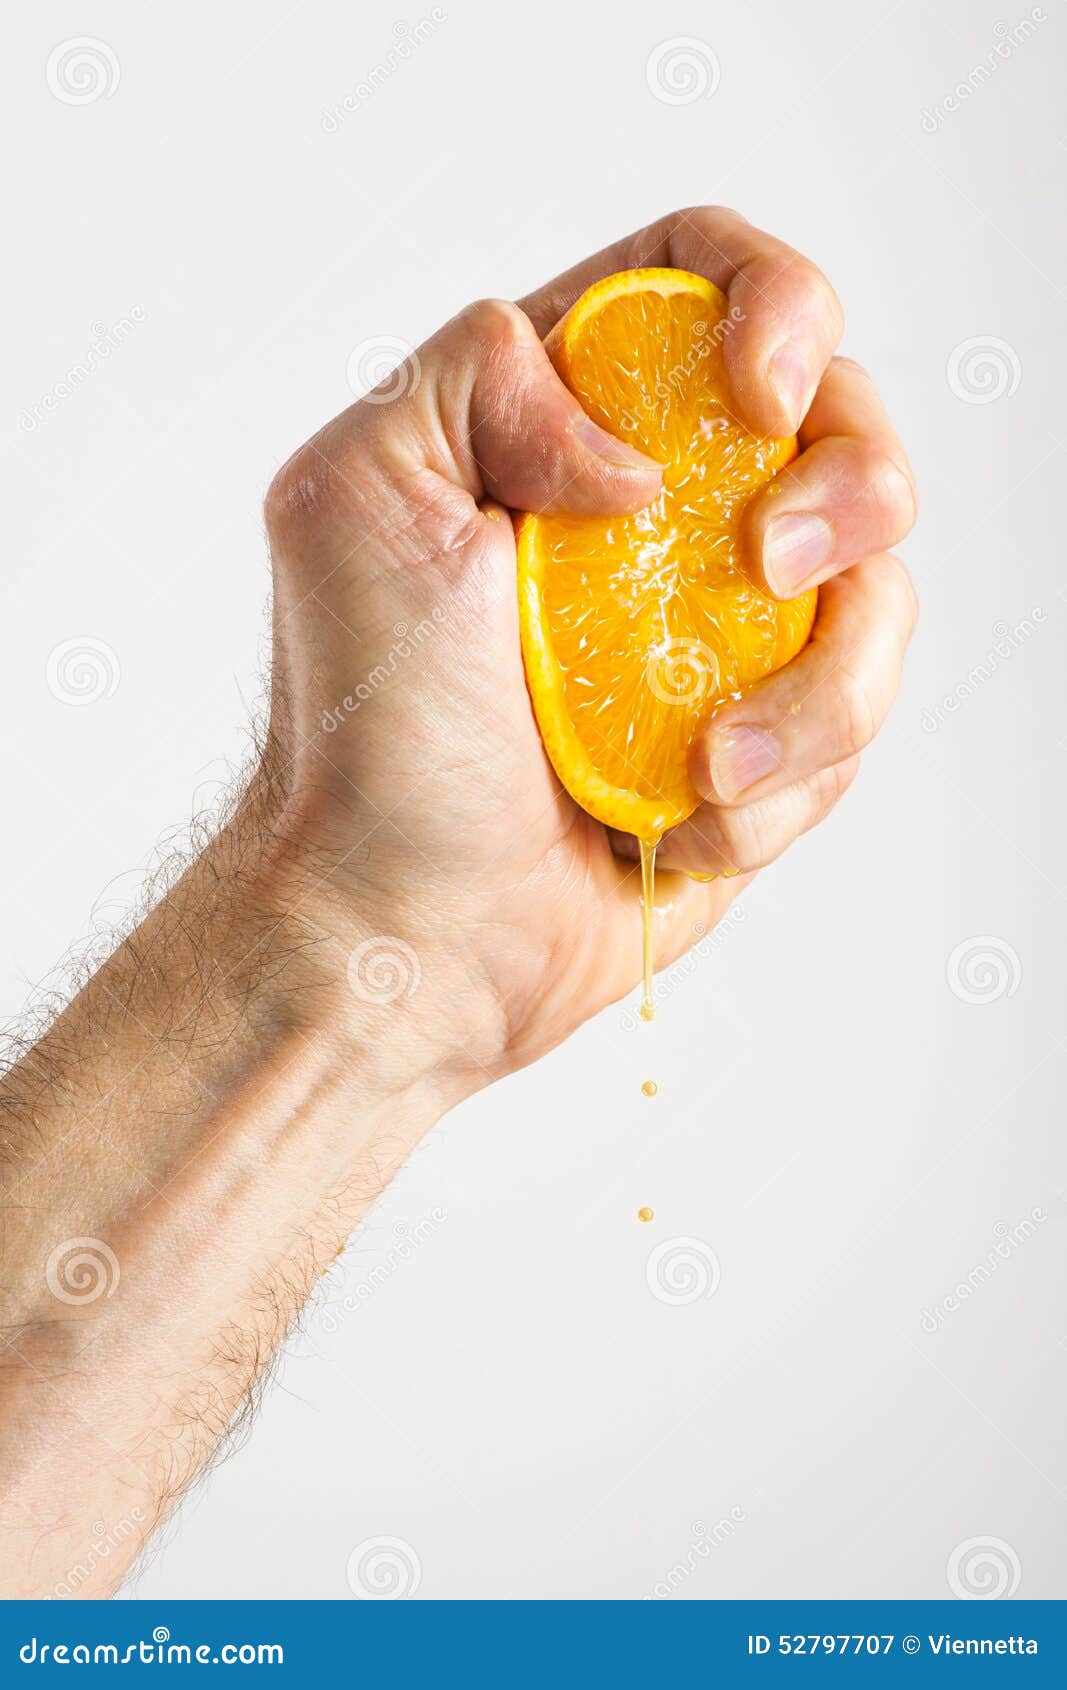 An anonymous man s hand squeezing an orange half until the juice comes out on a gray background.